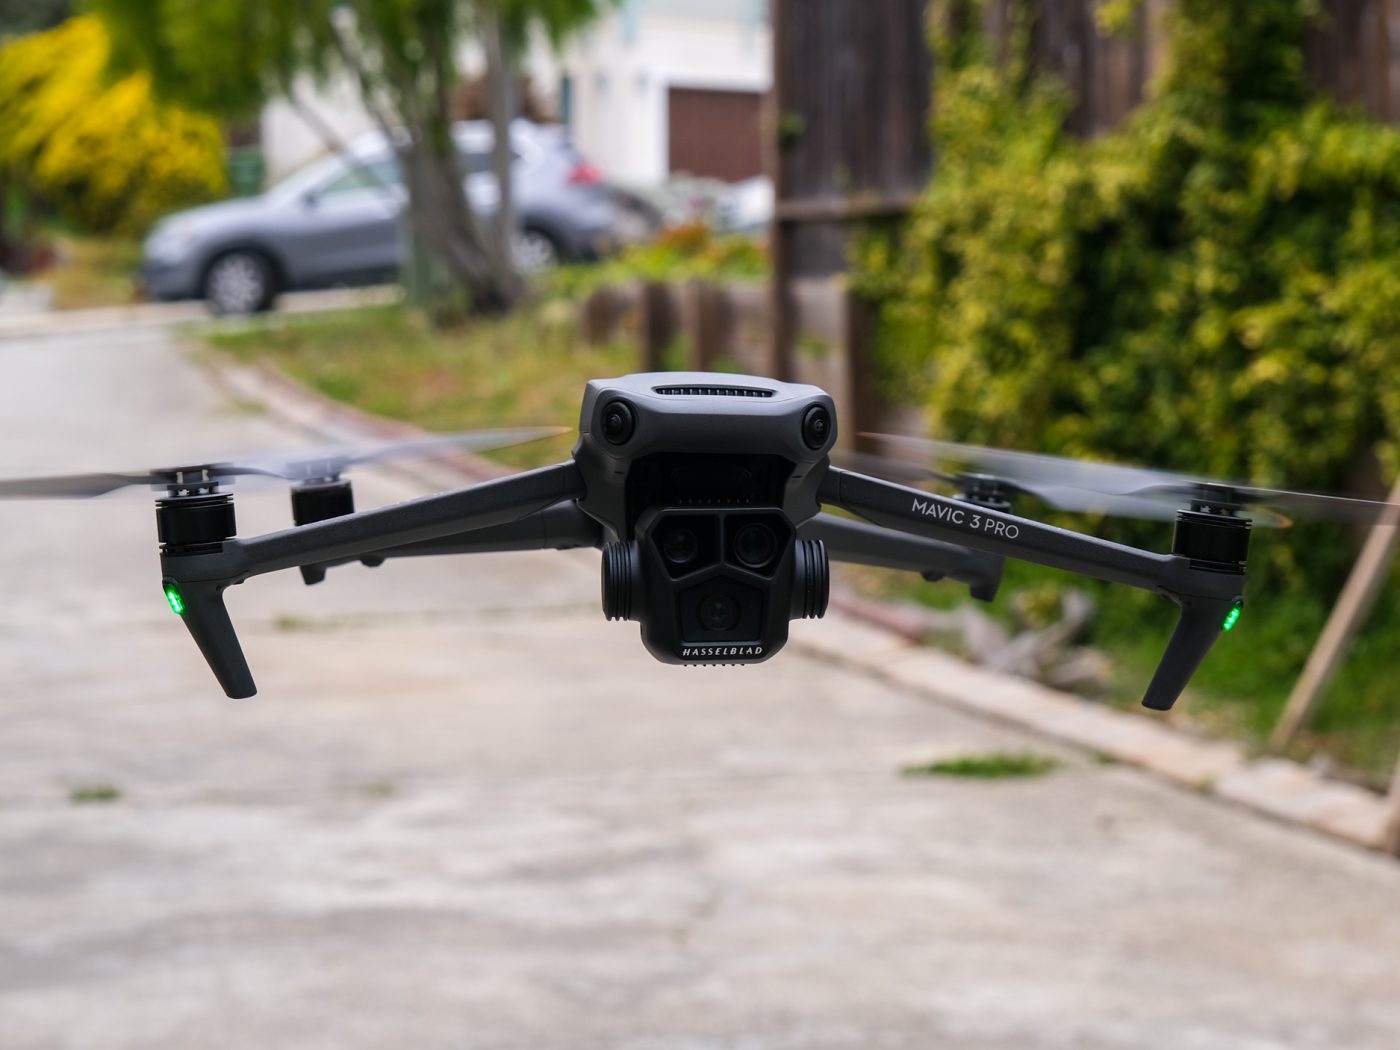 Getting Up Close with the DJI Mavic 3 Pro: An Honest Review